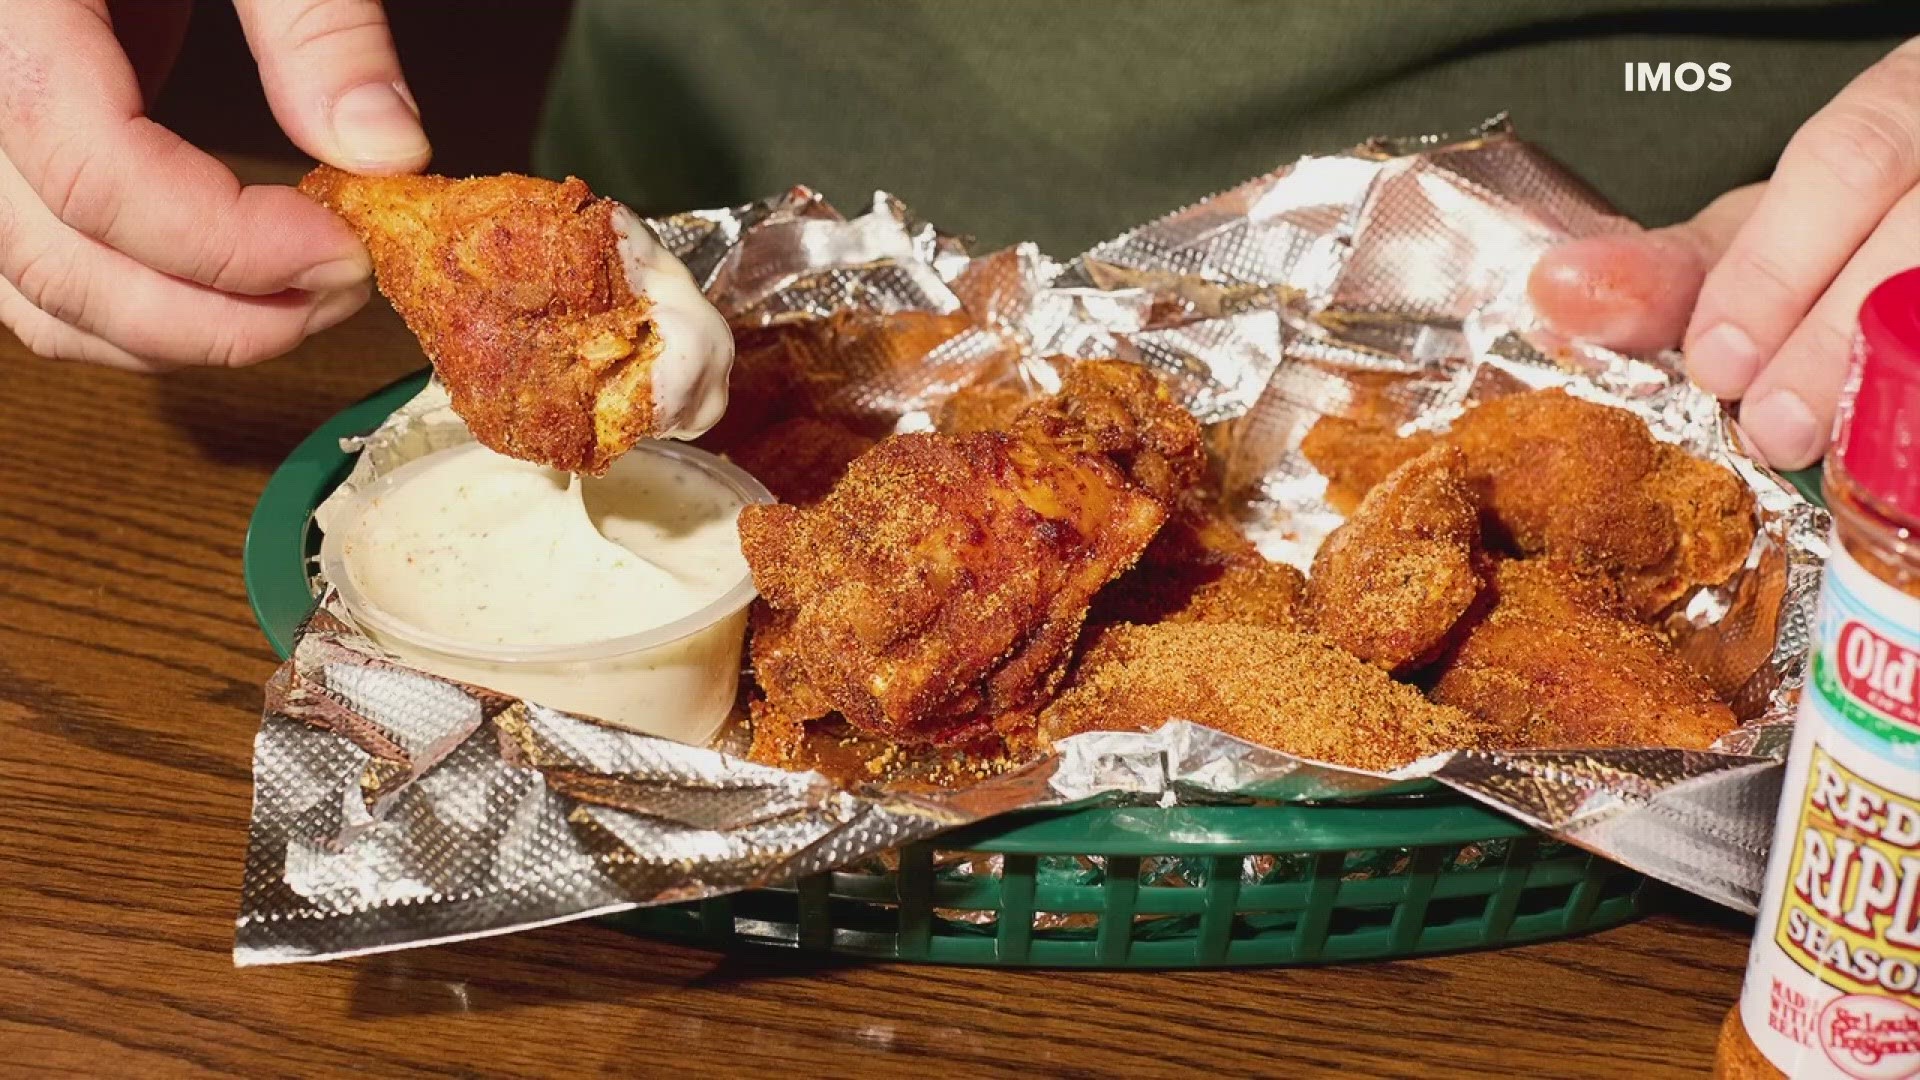 Imo's Pizza and Old Vienna Red Hot Riplets collaborated on a new menu item. Red Hot Riplets wings are available for a limited time.